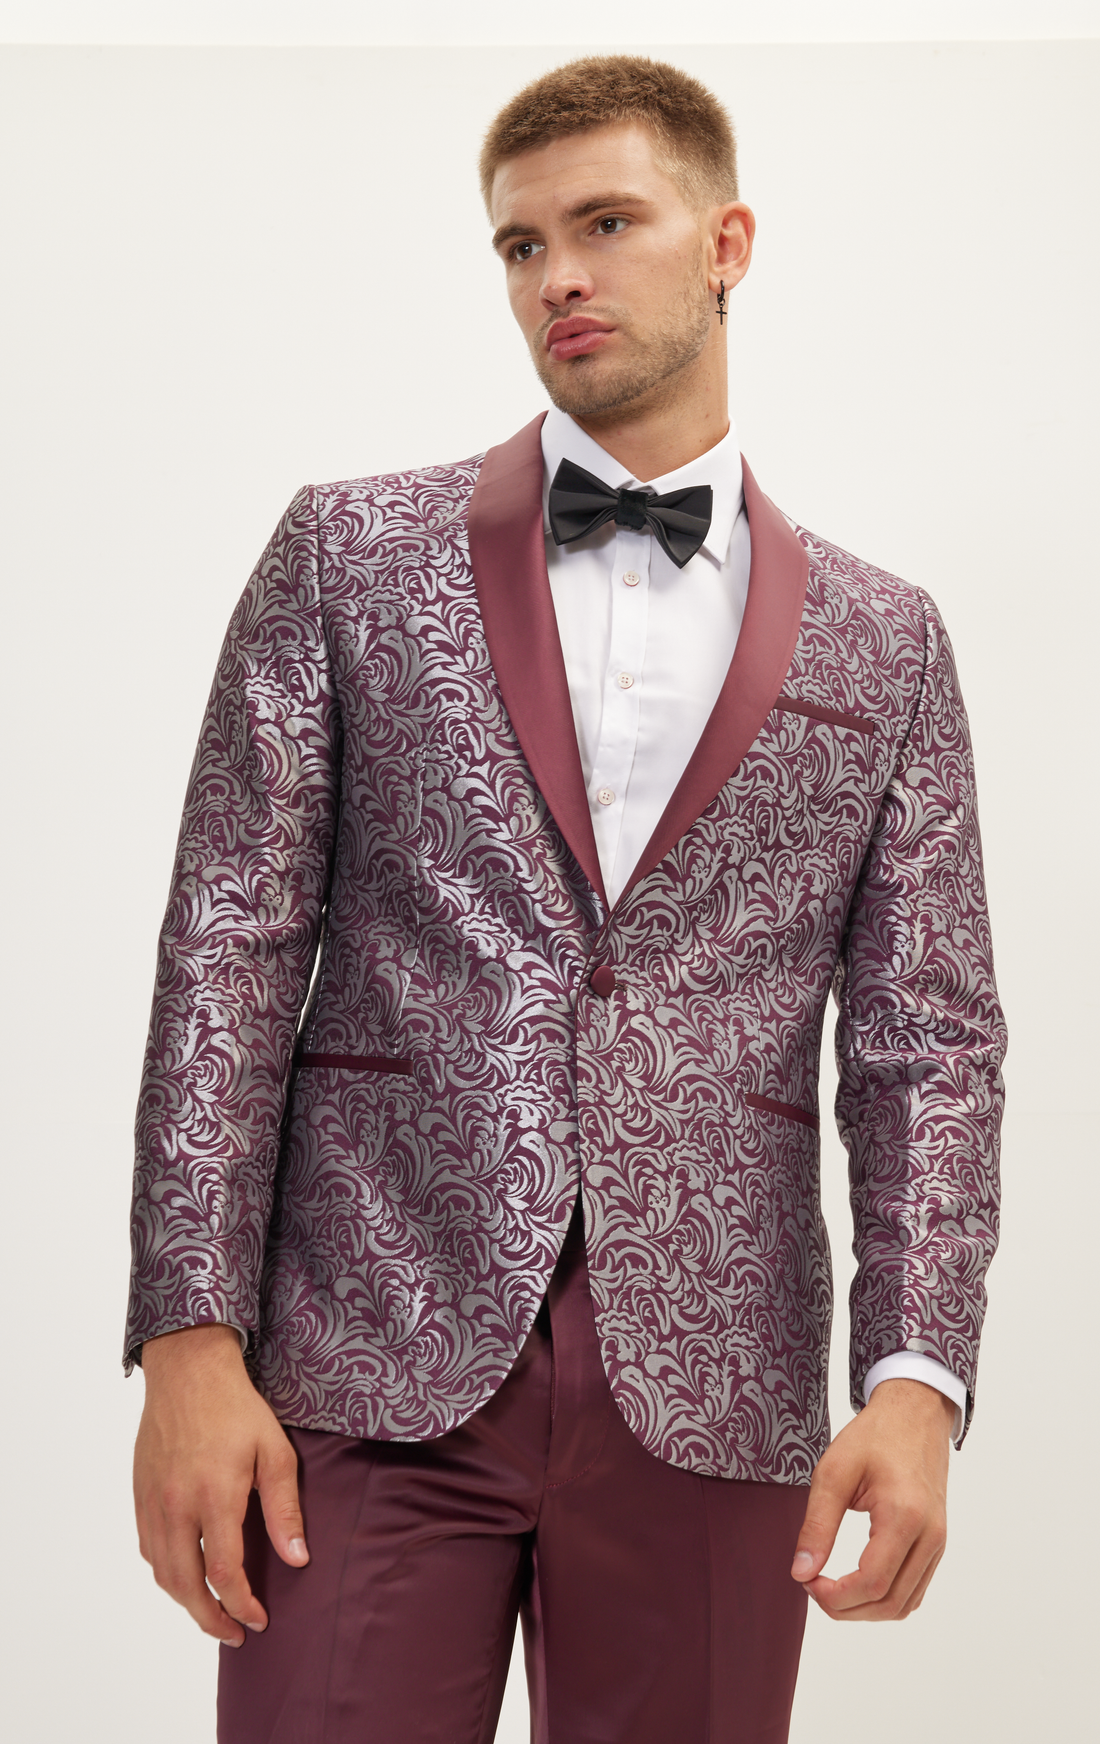 N° 1050 ABSTRACT FLORAL TUXEDO - BURGUNDY